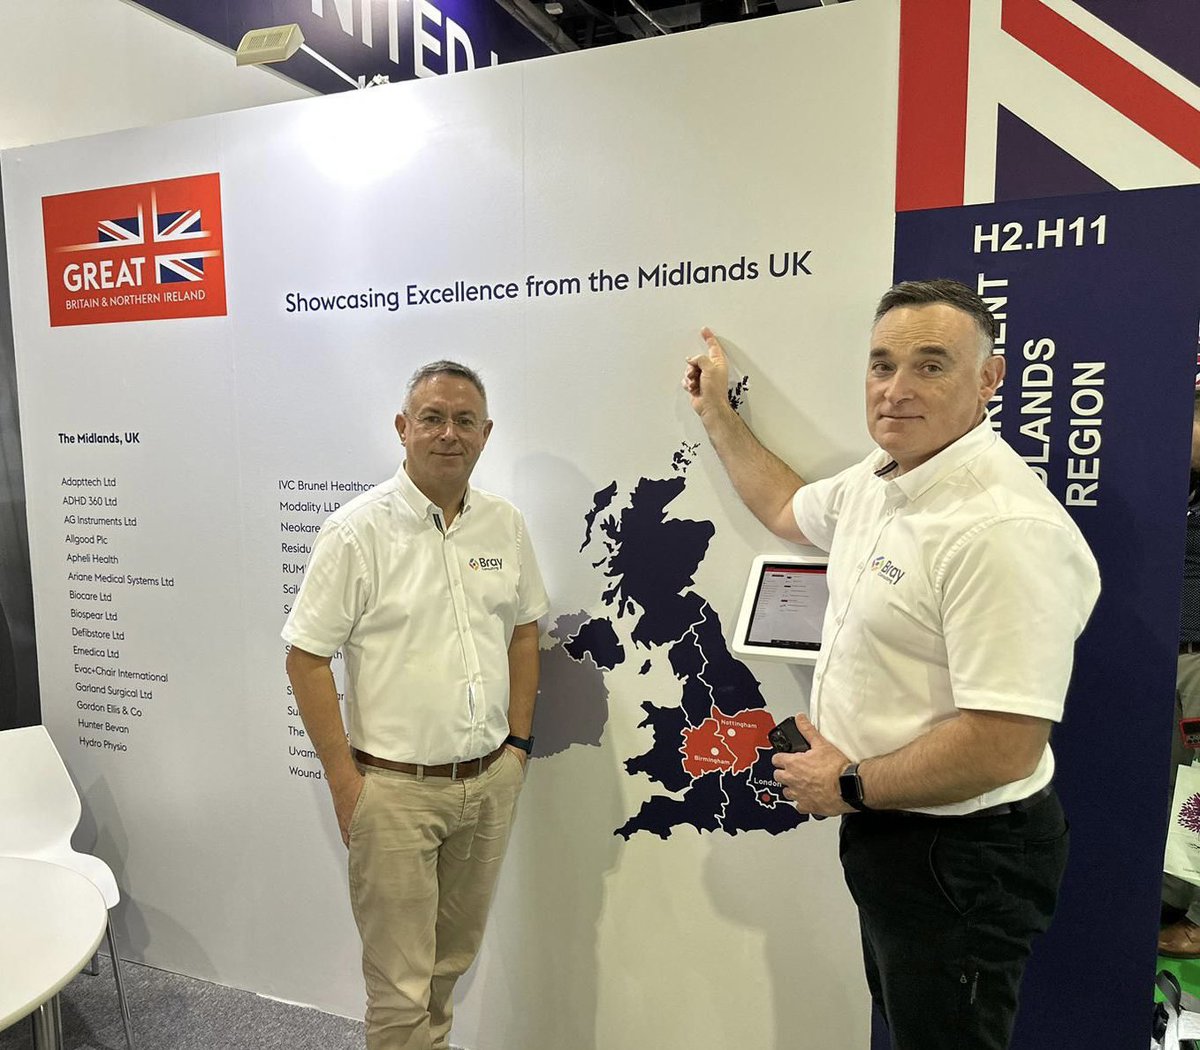 Day 3 at the @Arab_Health Exhibition  in #Dubai and Steve and Simon are helping showcase excellence from the Midlands region. 
#arabhealth2023 #exportingisgreat #arabhealth #westmidlands #shropshire